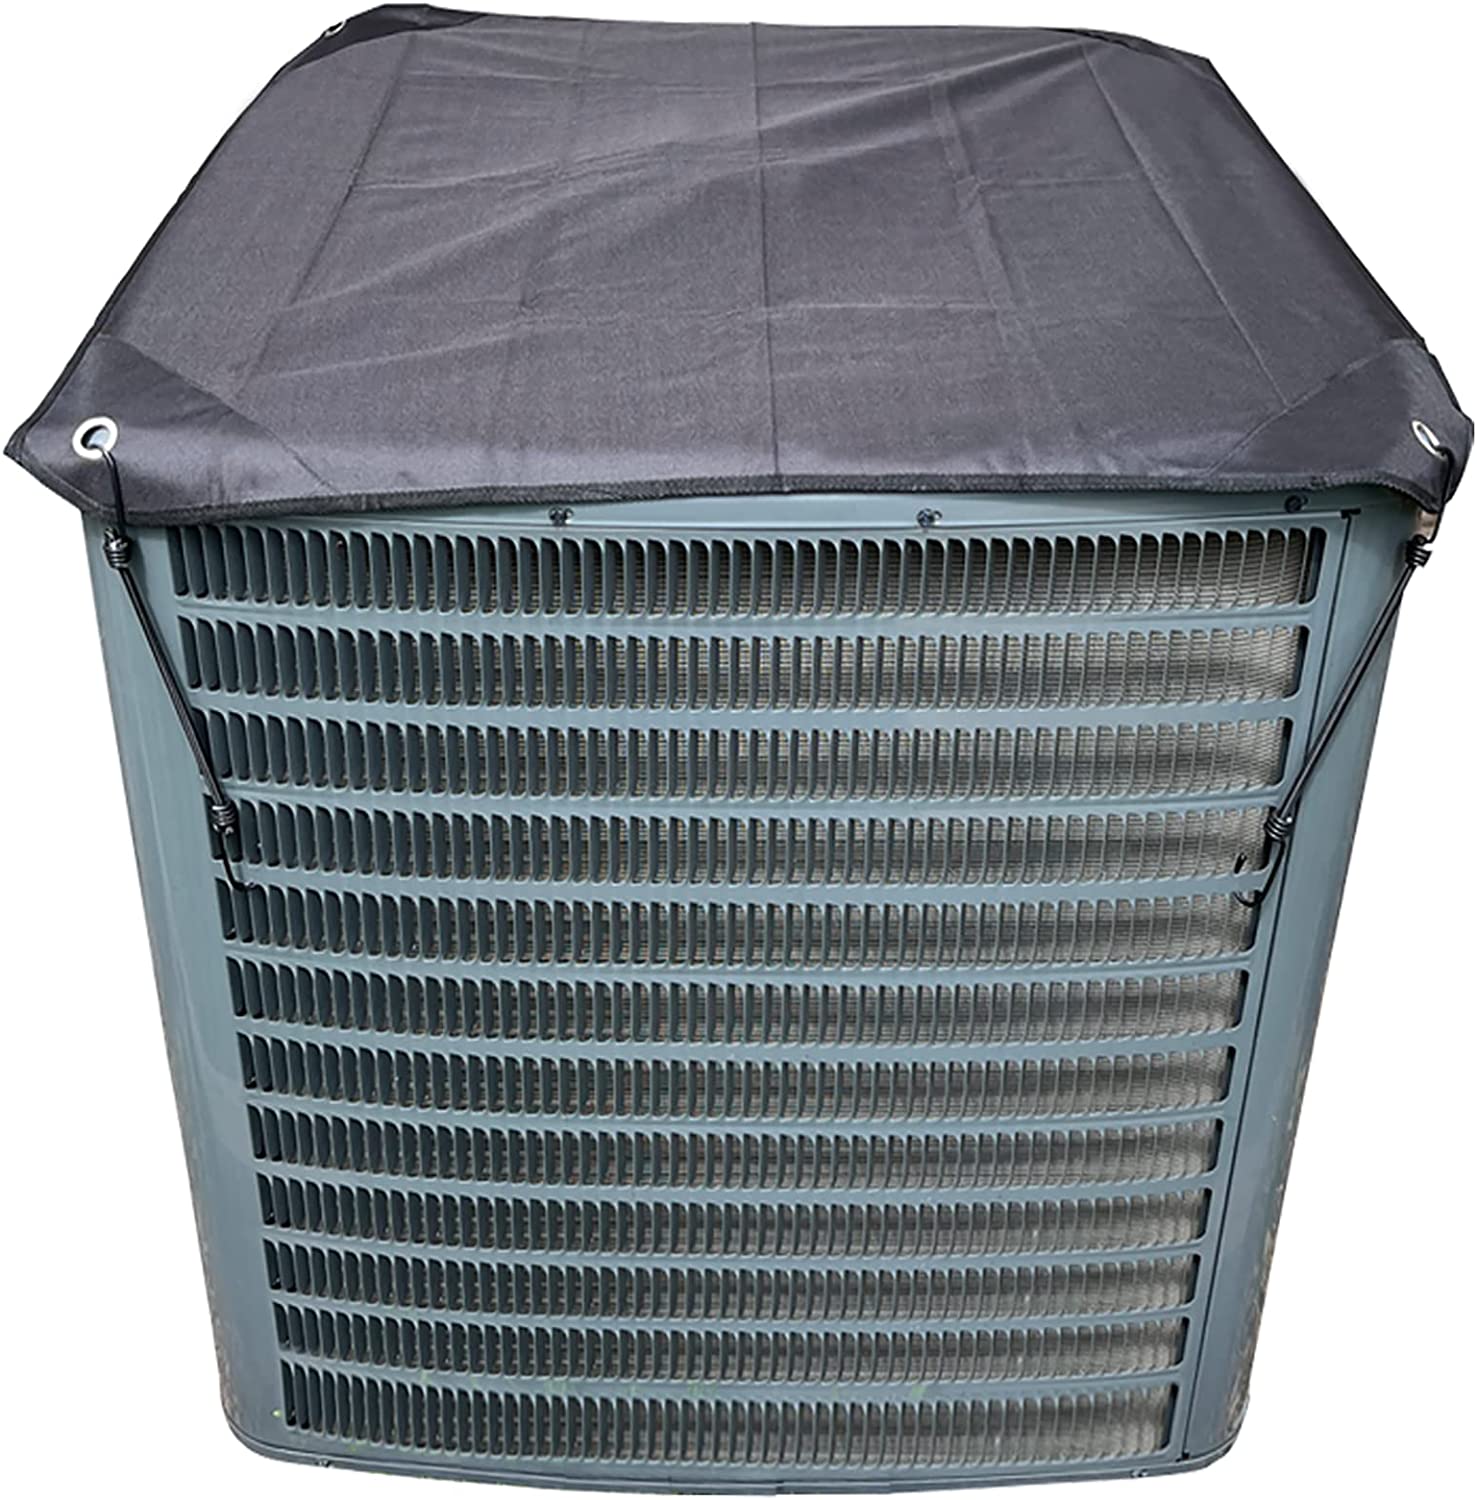 Air Conditioner Cover for Outside - Canopy Style